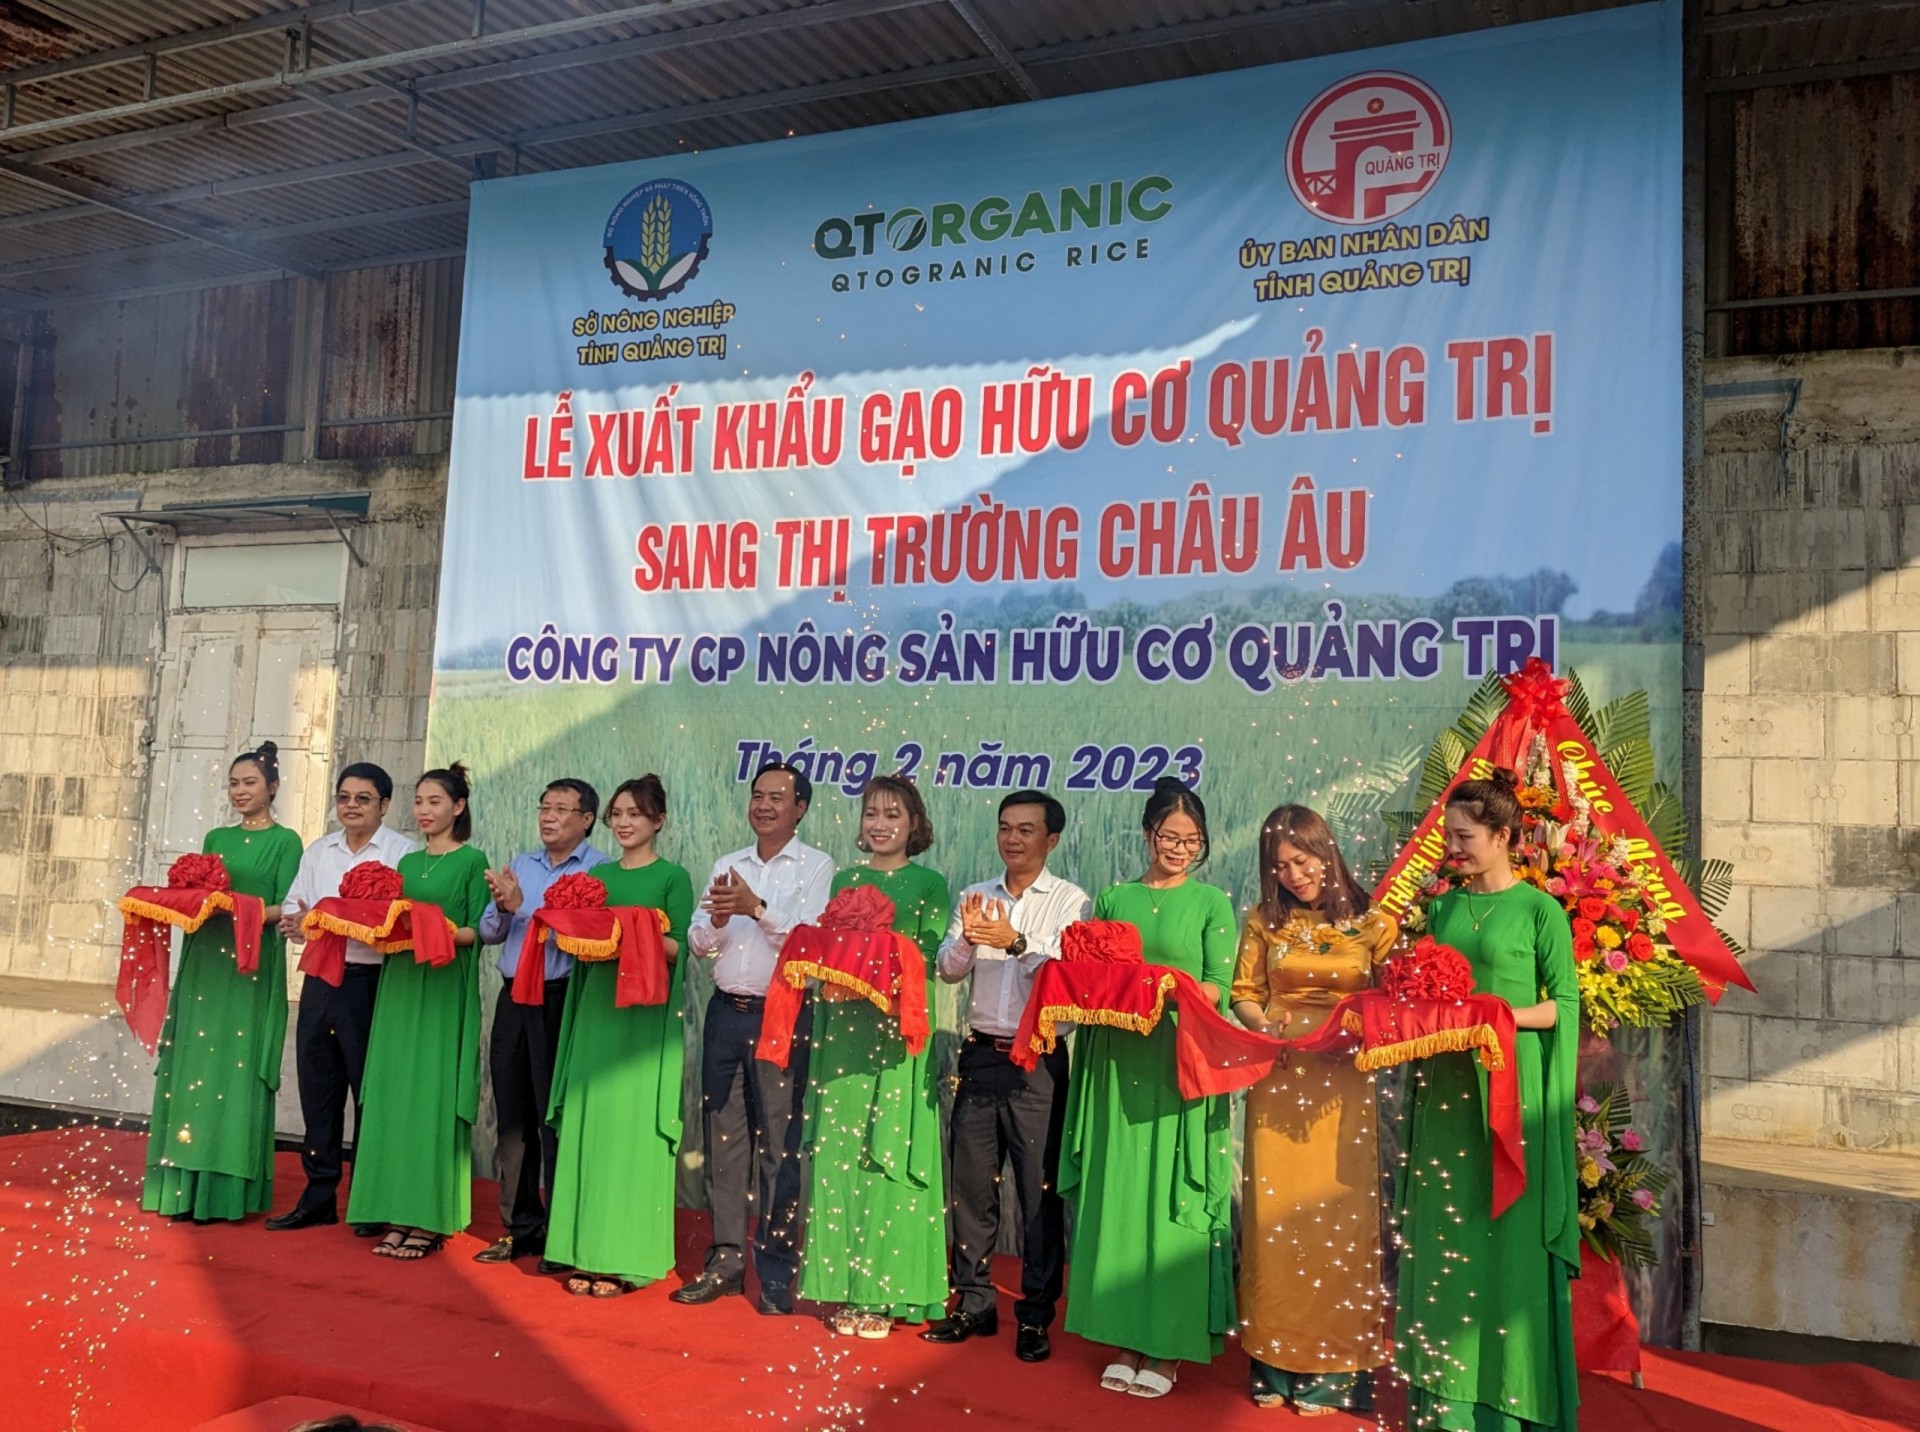 The ceremony launching Quang Tri organic rice exports to the European market